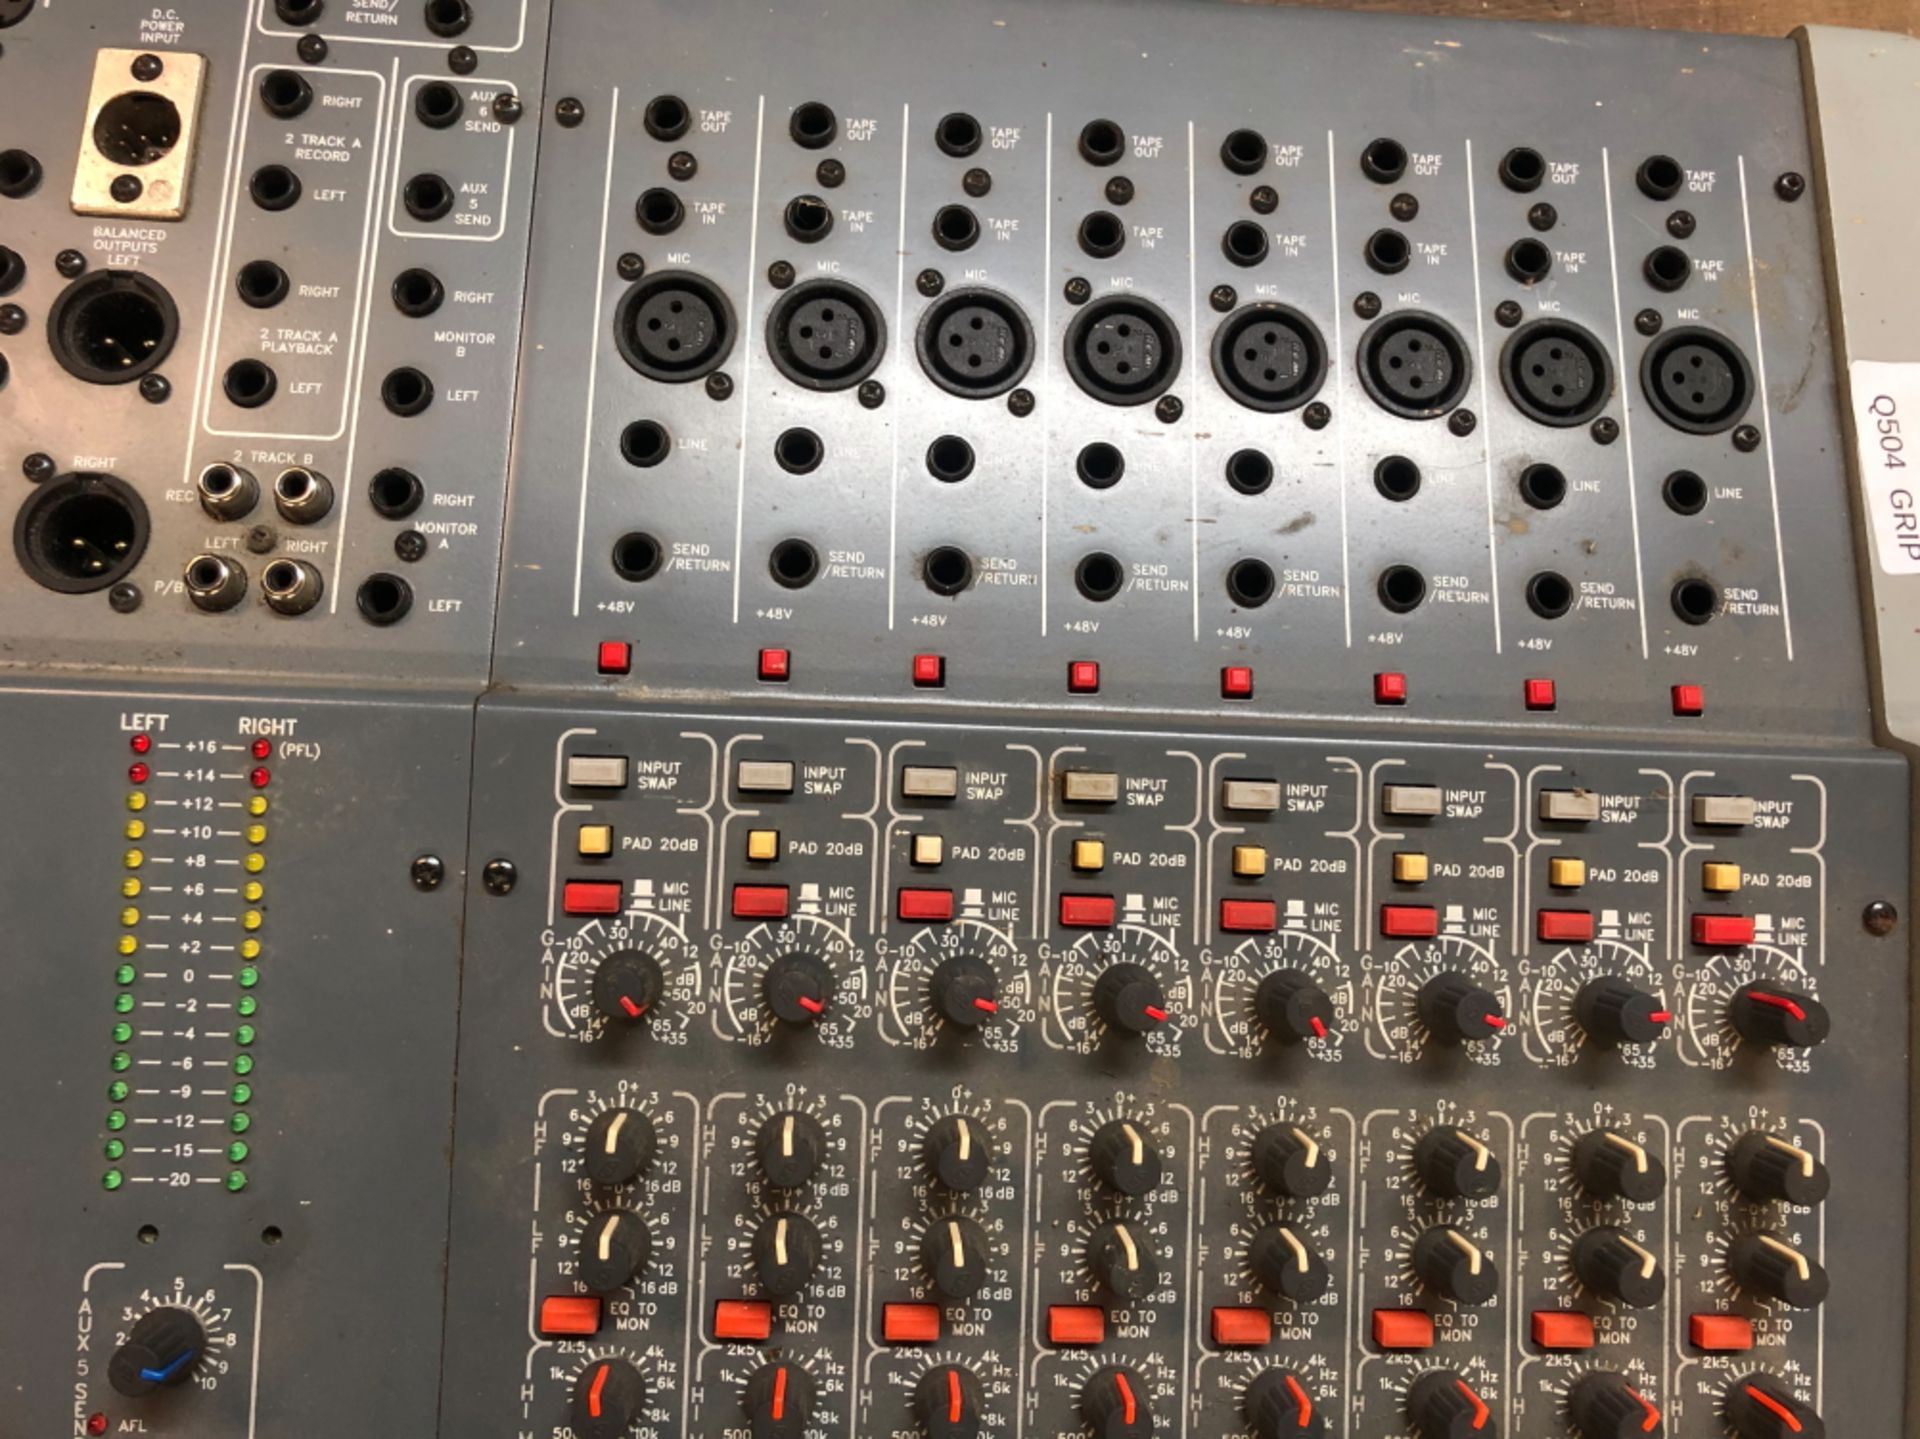 A STUDIO MASTER P7 MULTITRACK MIXING CONSOLE WITH MANUAL AND EXTERNAL POWER SUPPLY UNIT - Image 6 of 17